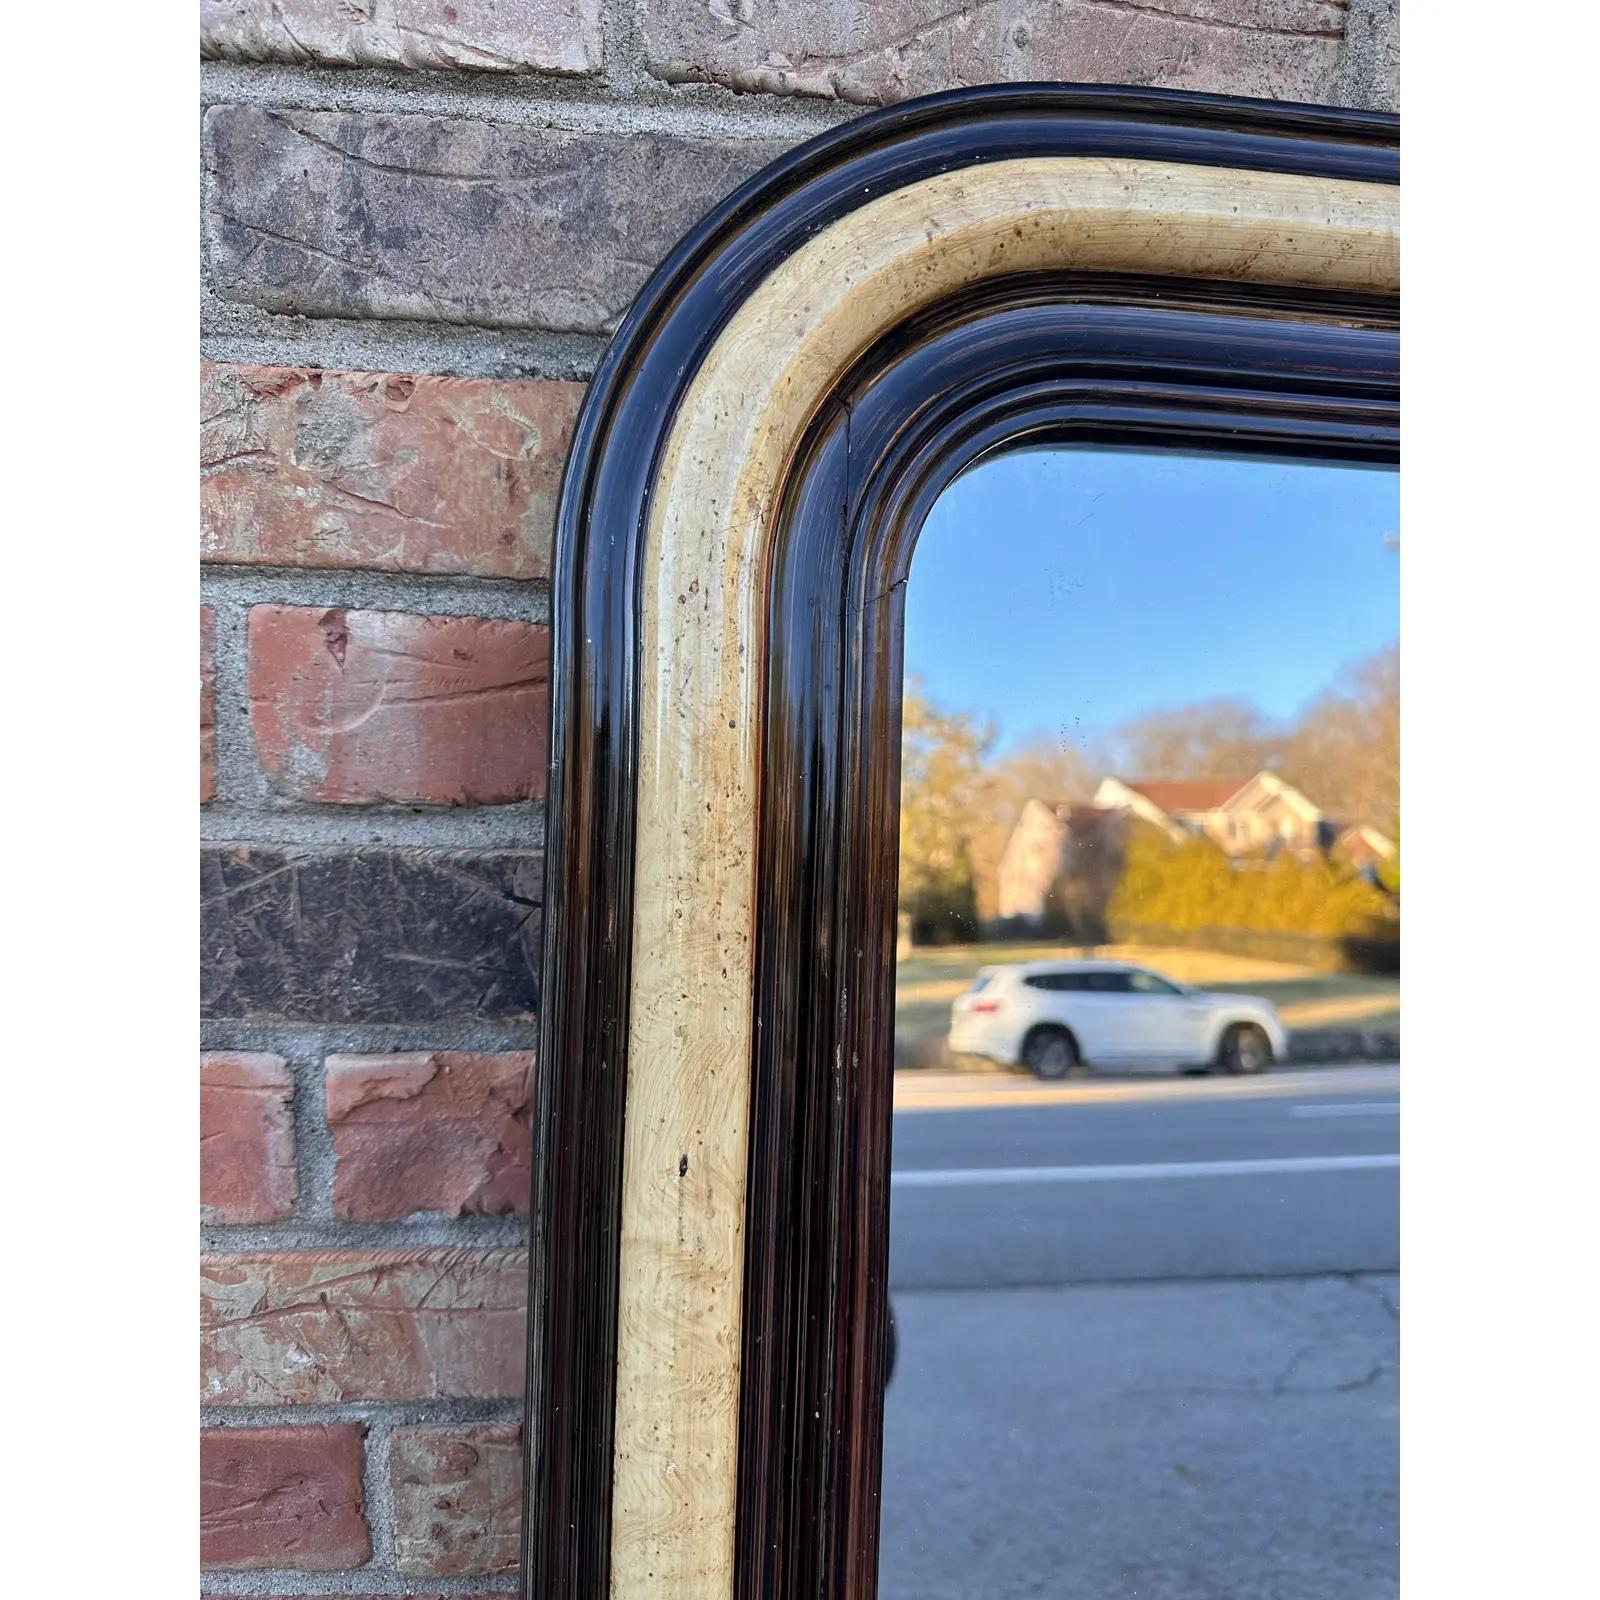 This is a stunning antique mirror! This piece has an ebonized outer and inner border which serves to accent the beautiful band of faux wood in the center. The colors of this piece complement each other perfectly, with the deep tones of the outer